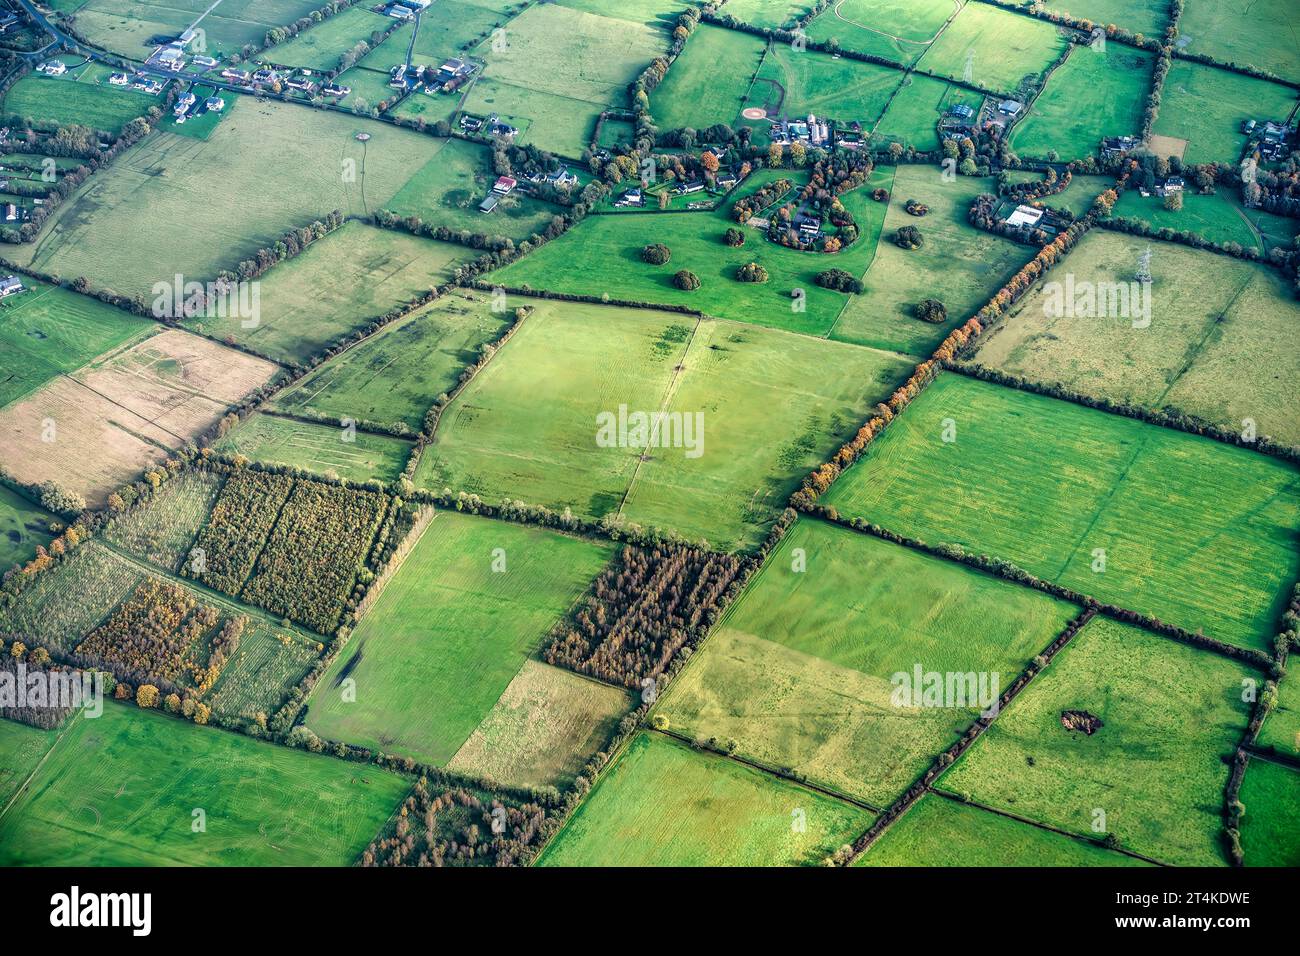 An aerial view of the rural landscape around Dublin Airport , Ireland, showing a patchwork of green fields divided by hedgerows and trees. Stock Photo